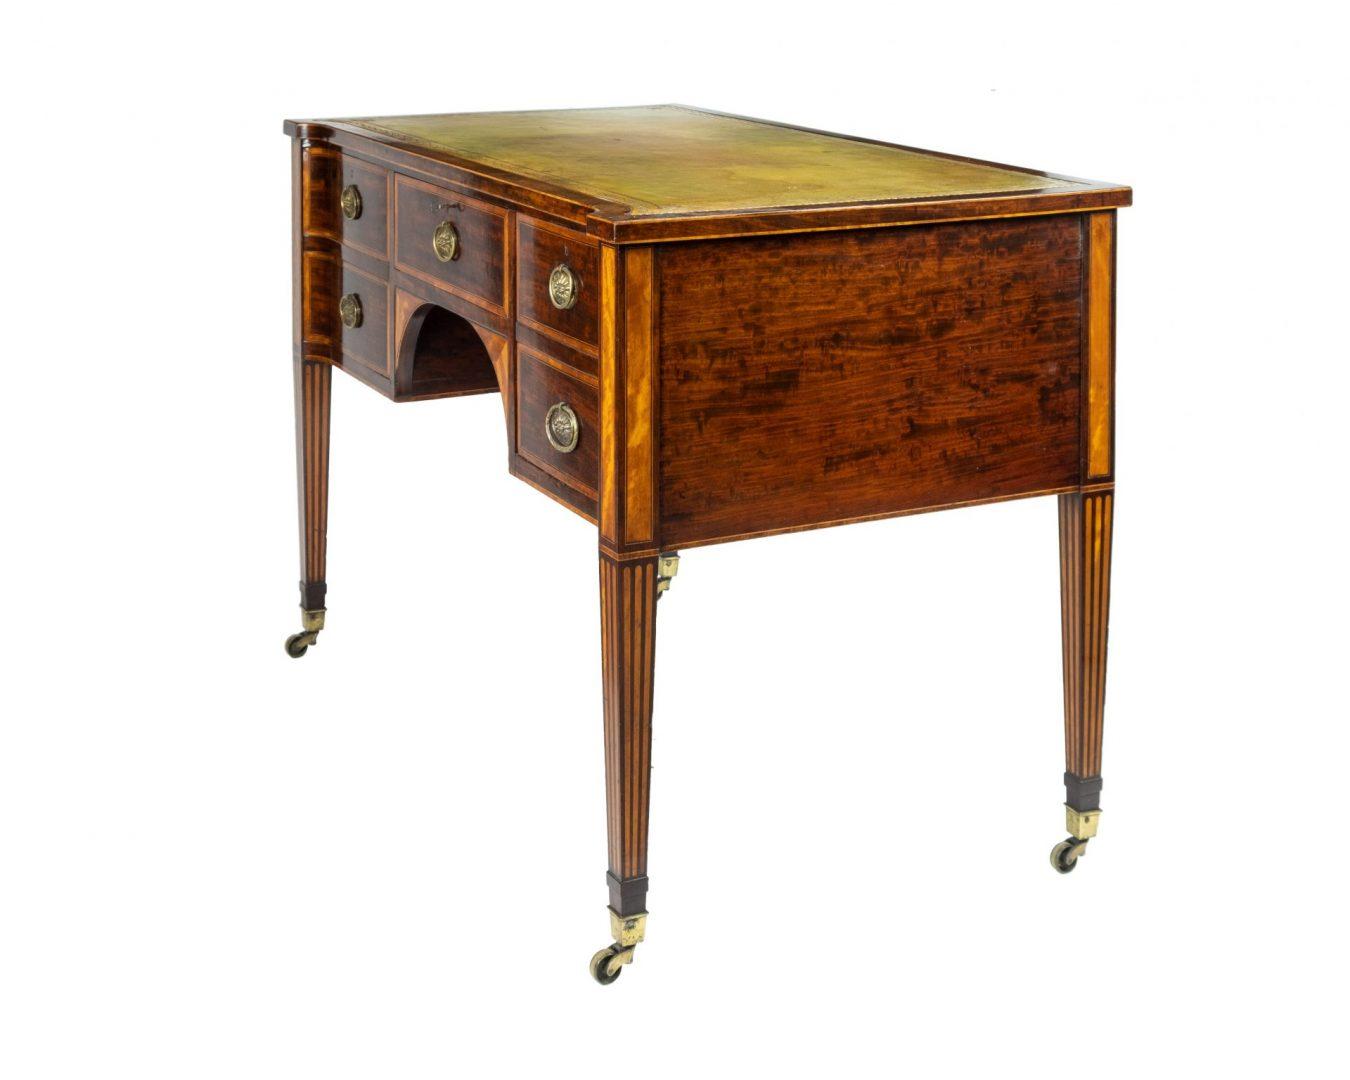 19th century figured mahogany writing desk with tooled leather inset top, the central frieze drawer flanked by a pair of cupboards, on square tapering legs inlaid with satinwood, stamped ‘Wright & Mansfield, 104 Bond Street.
Wright & Mansfield, the